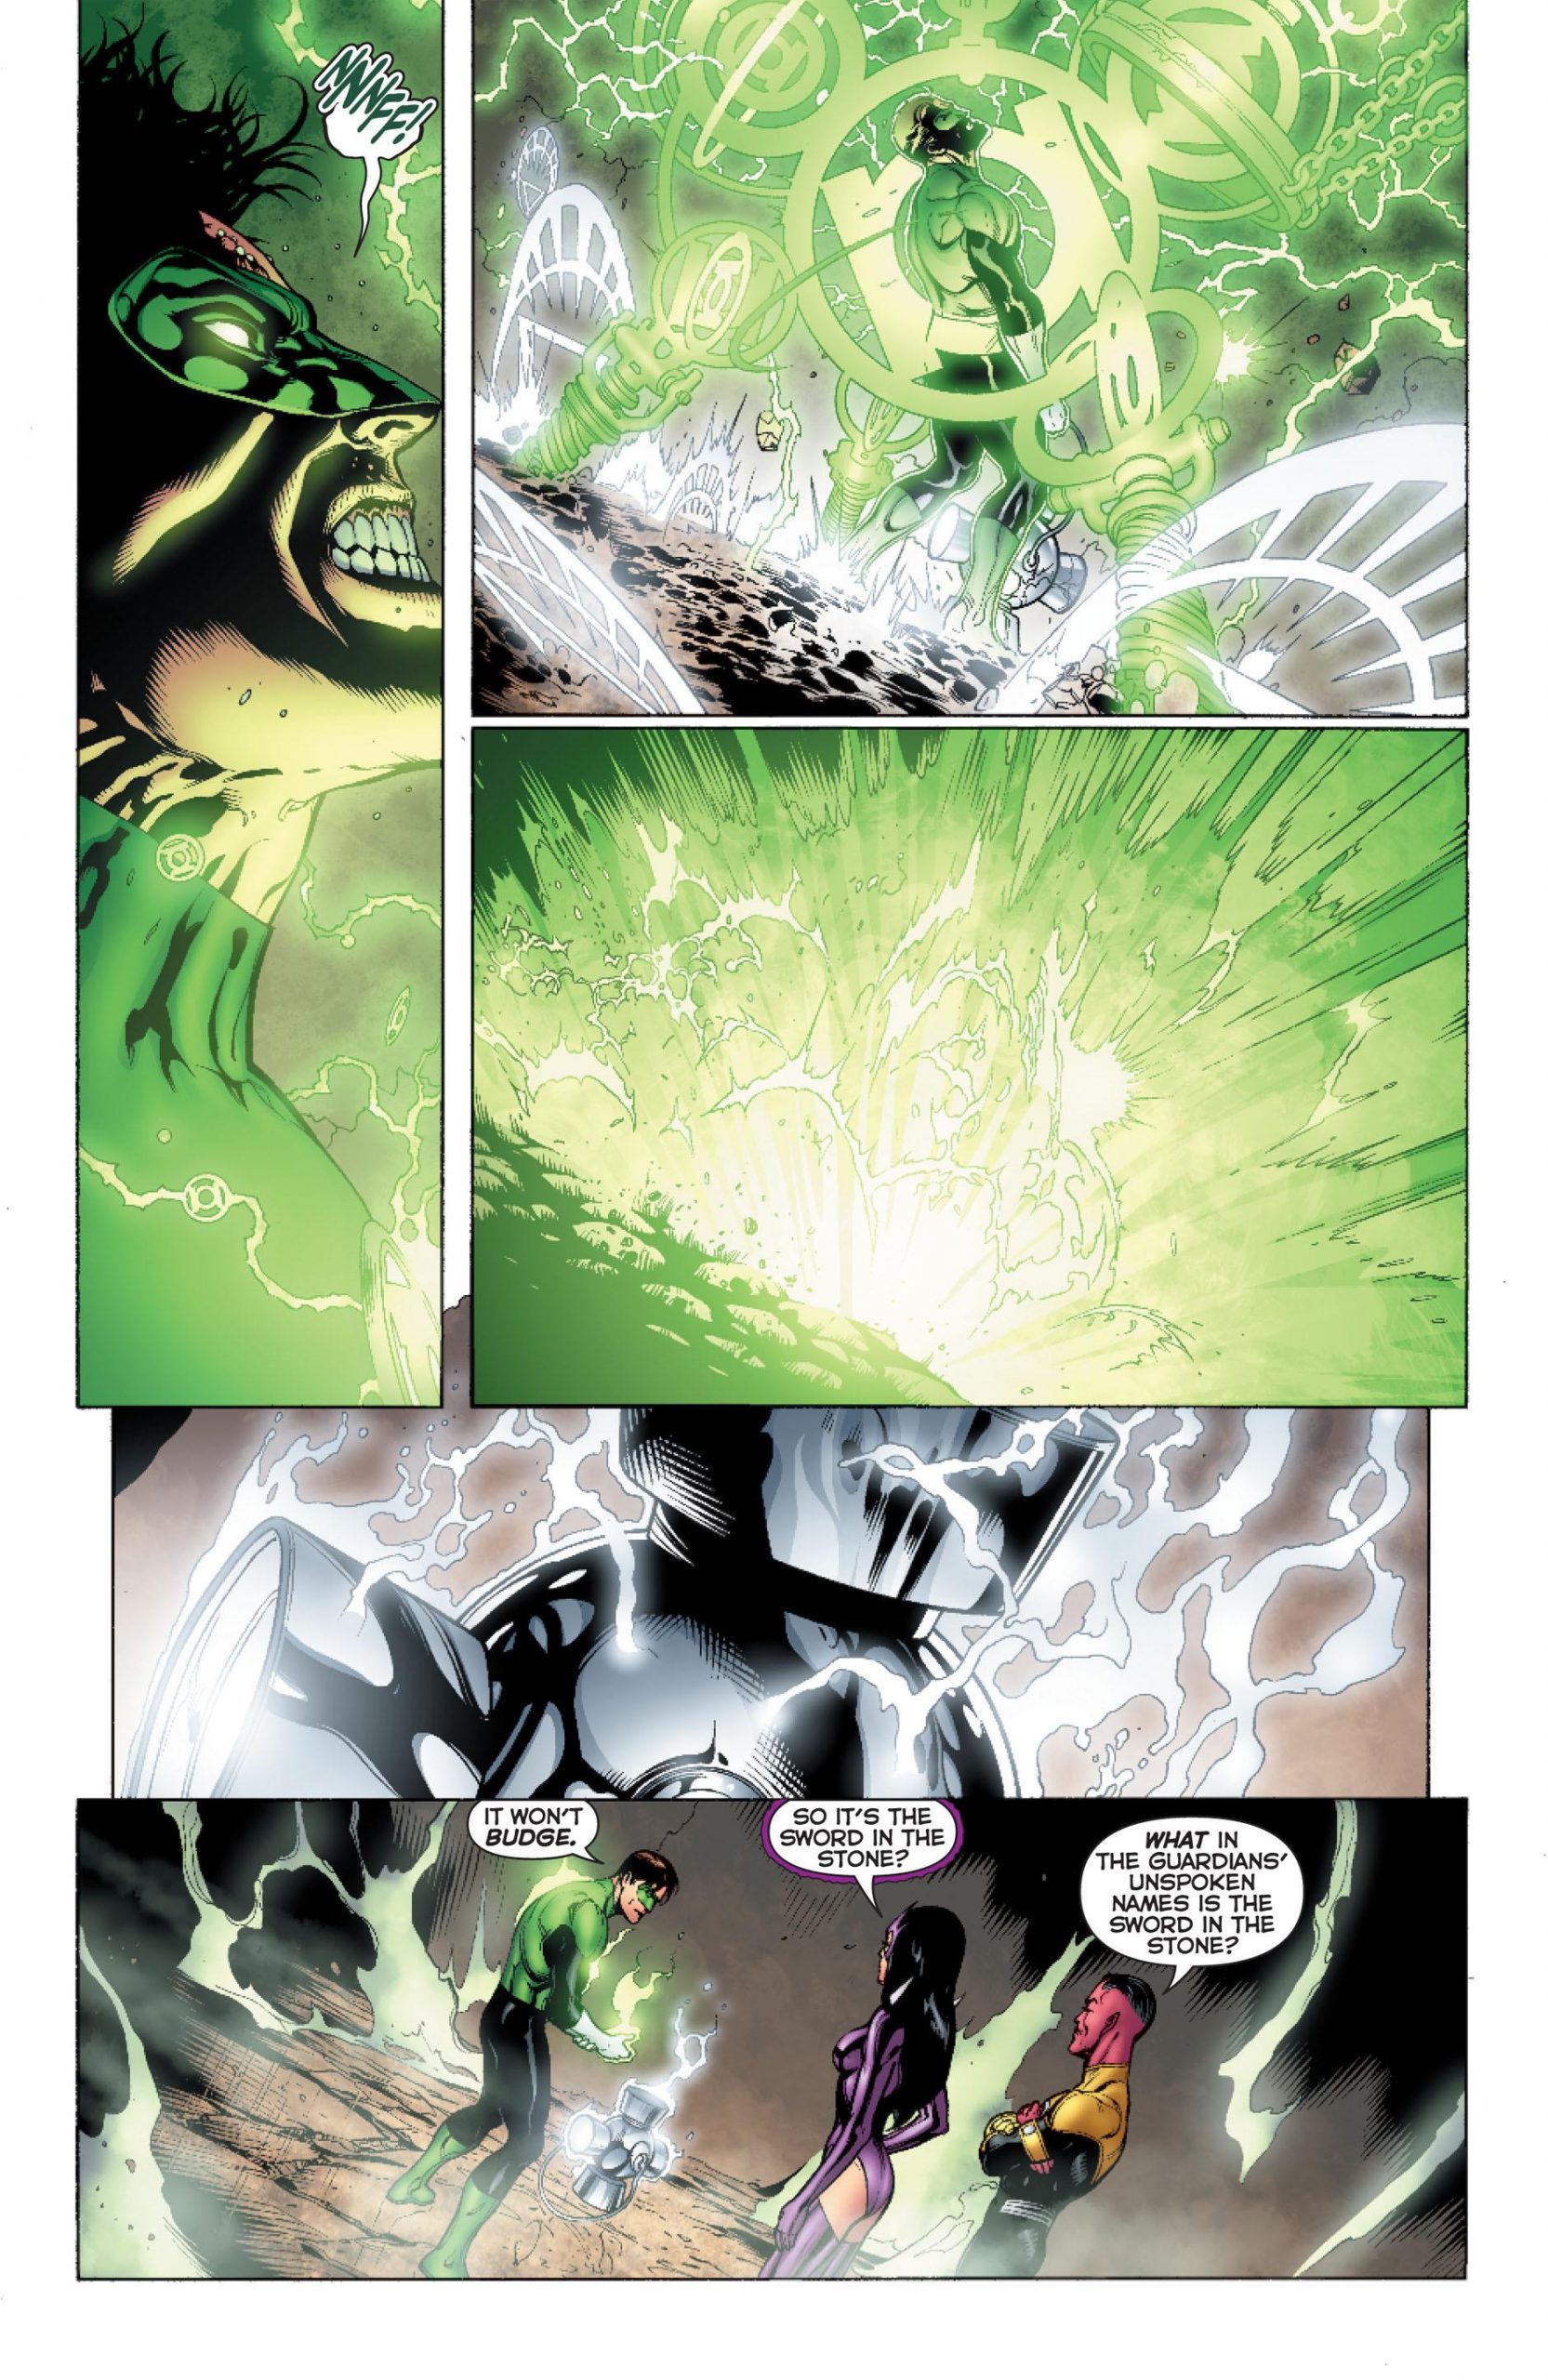 Green Lantern - Brightest Day review